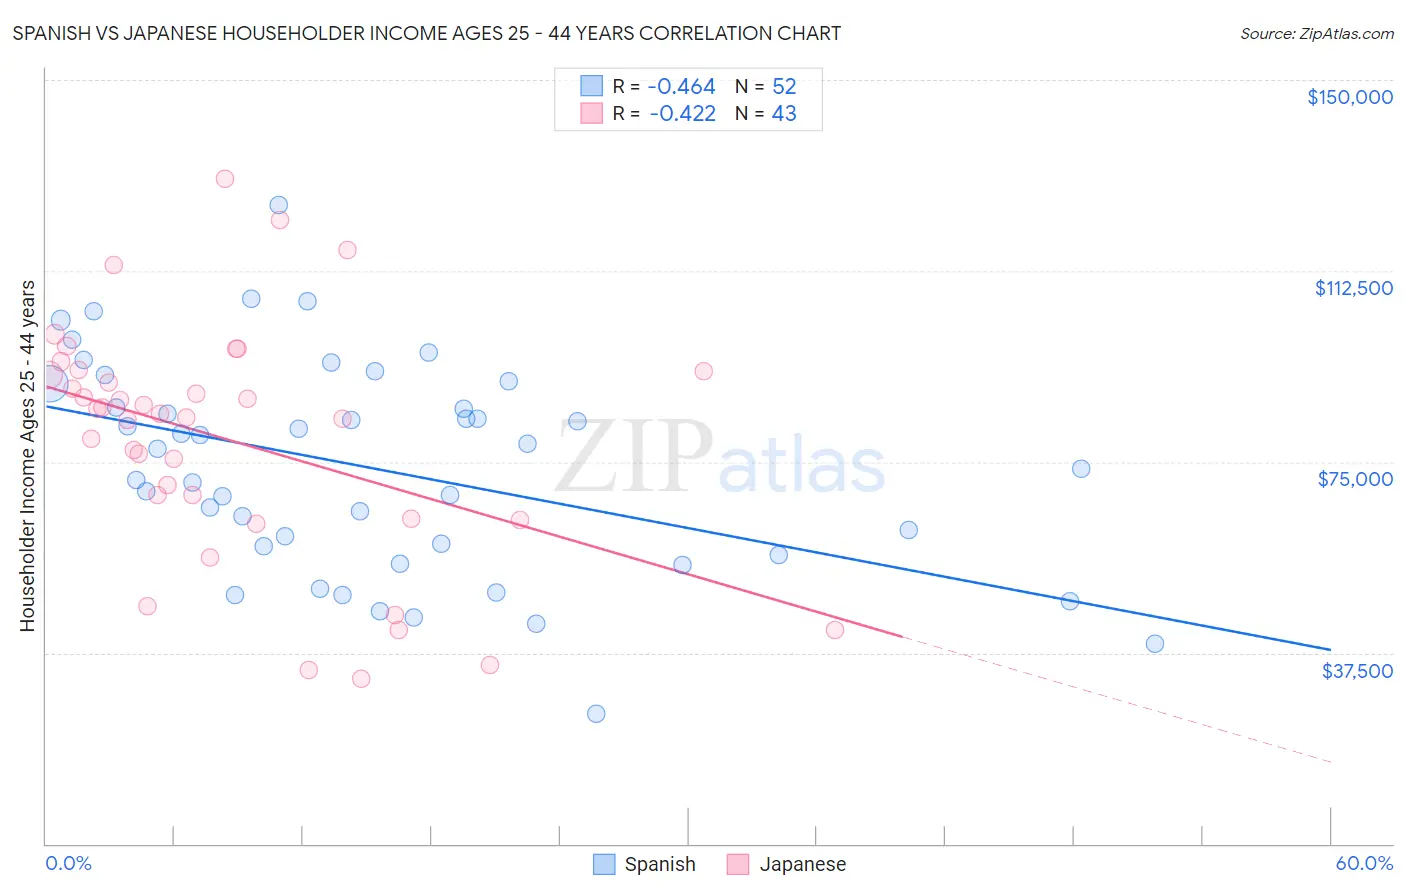 Spanish vs Japanese Householder Income Ages 25 - 44 years